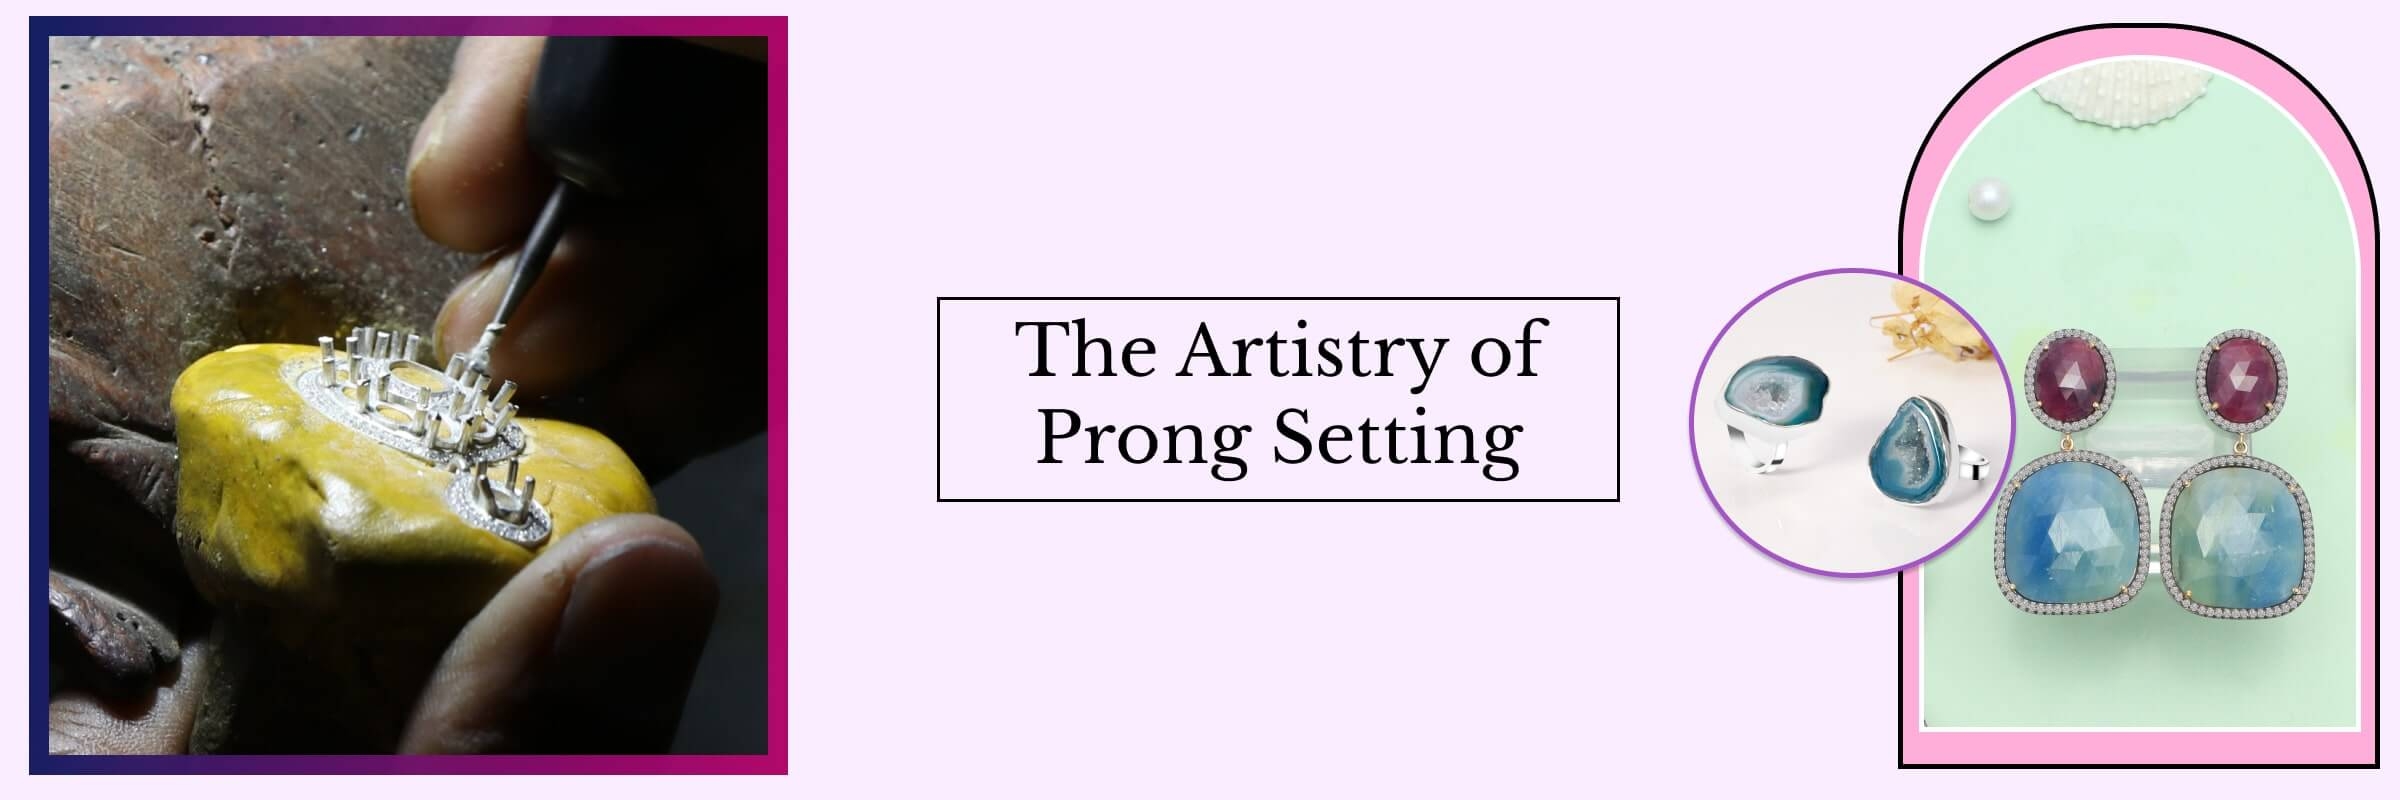 What is Prong Setting?